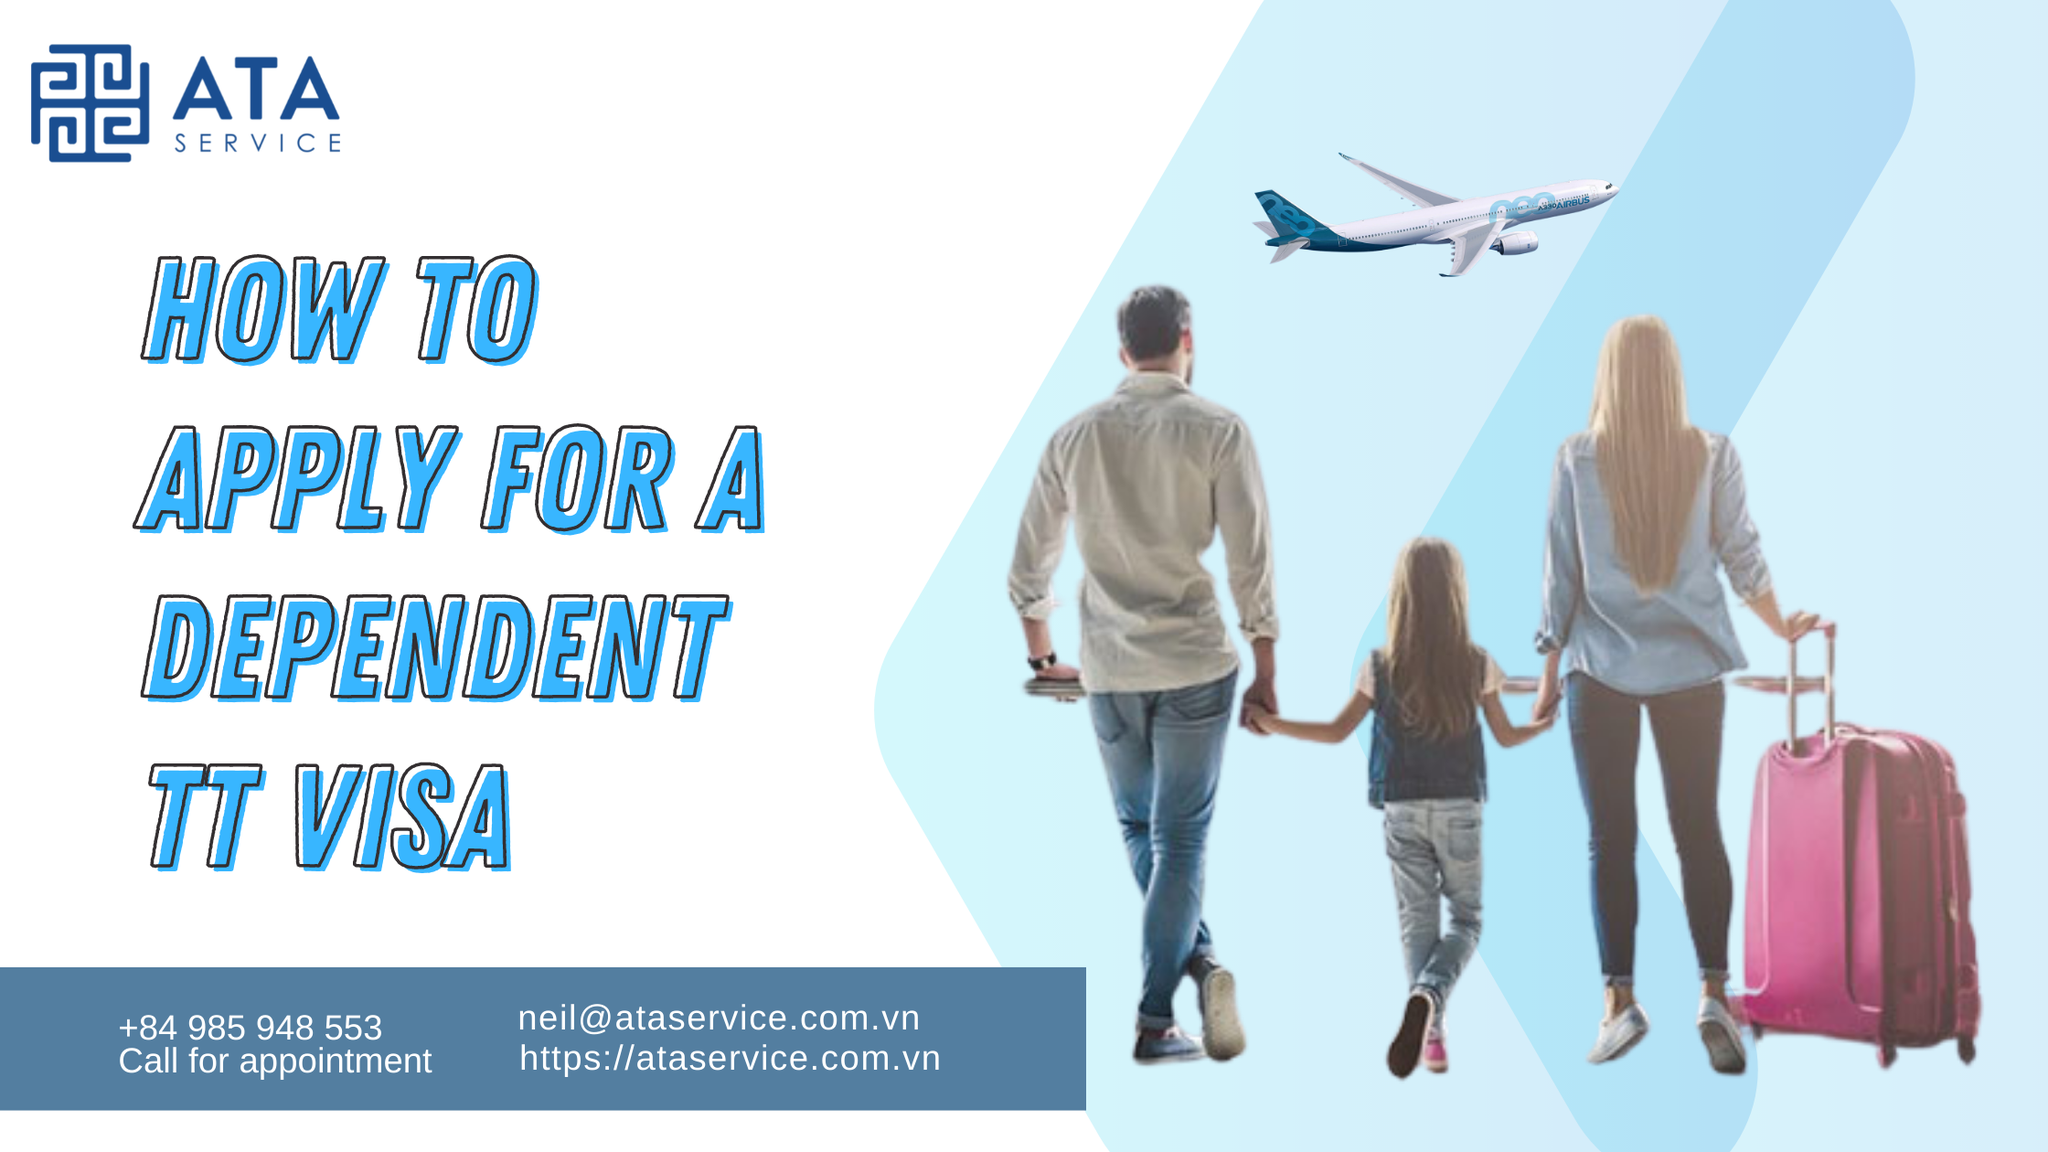 HOW TO APPLY FOR A DEPENDENT TT VISA?